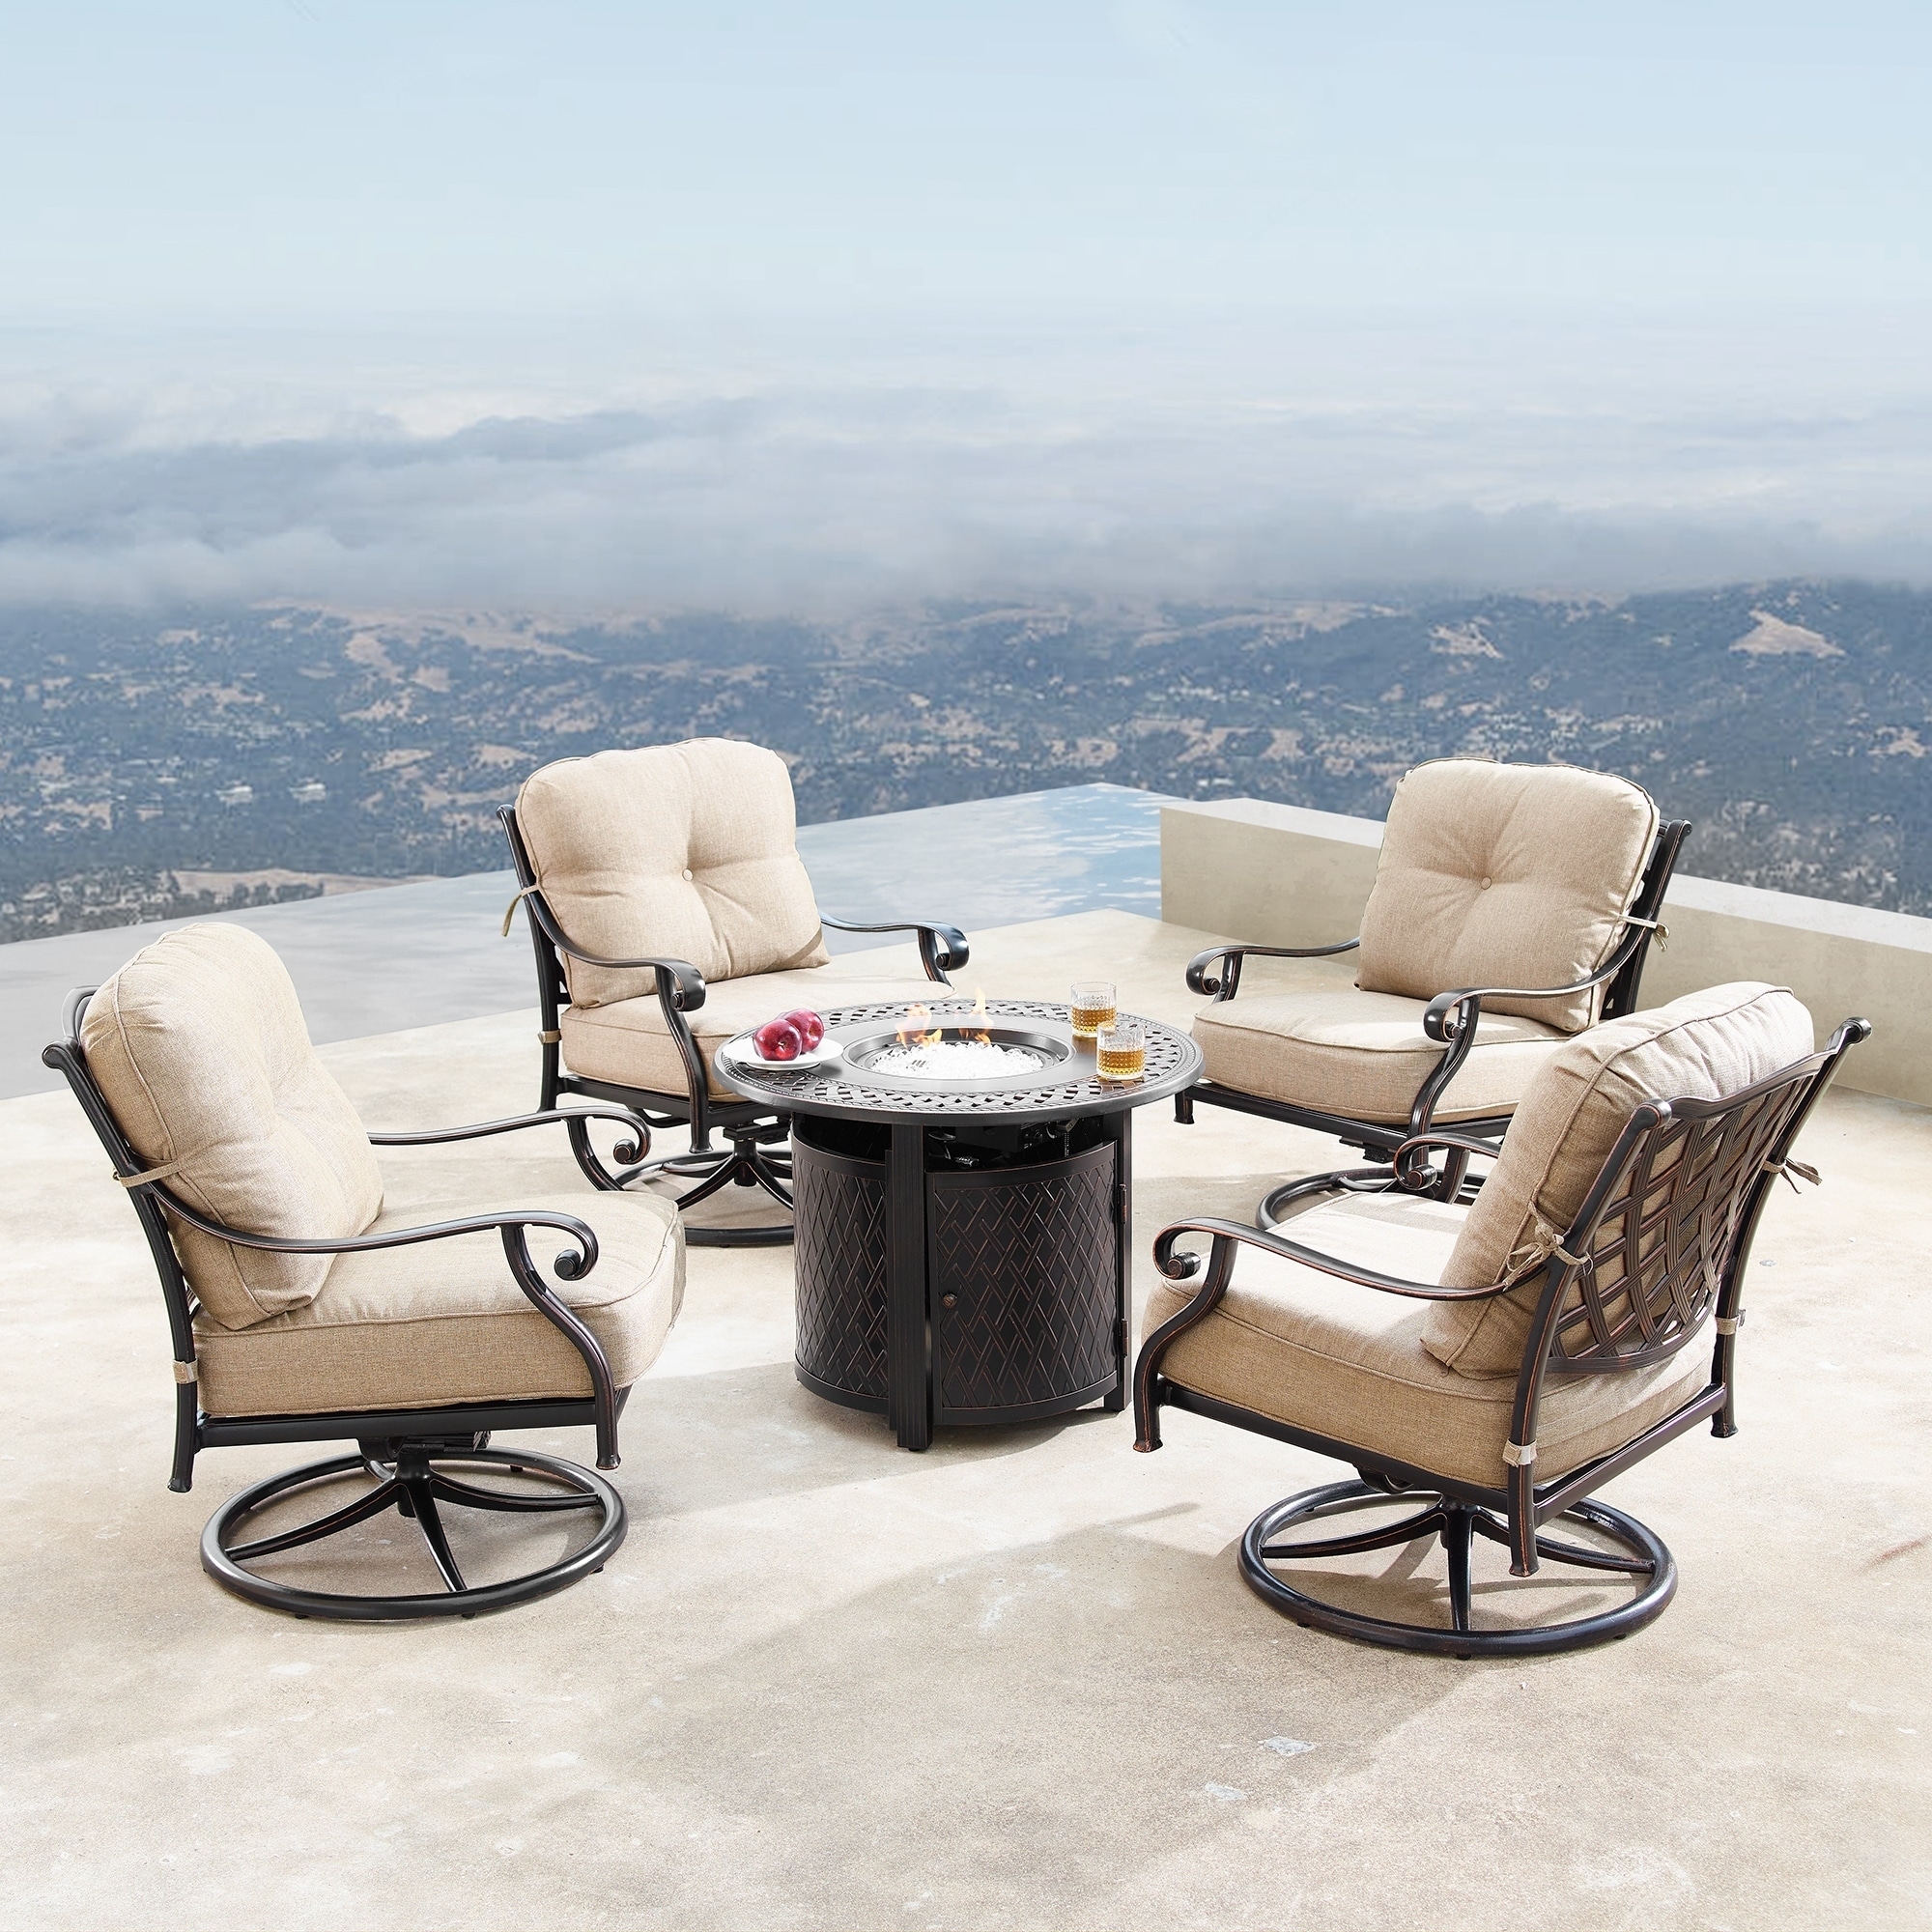 Outdoor Aluminum 34 In. Round Fire Table Set With Four Deep Seating Swivel Rocking Chairs  Fire Beads  Lid And Fabric Cover